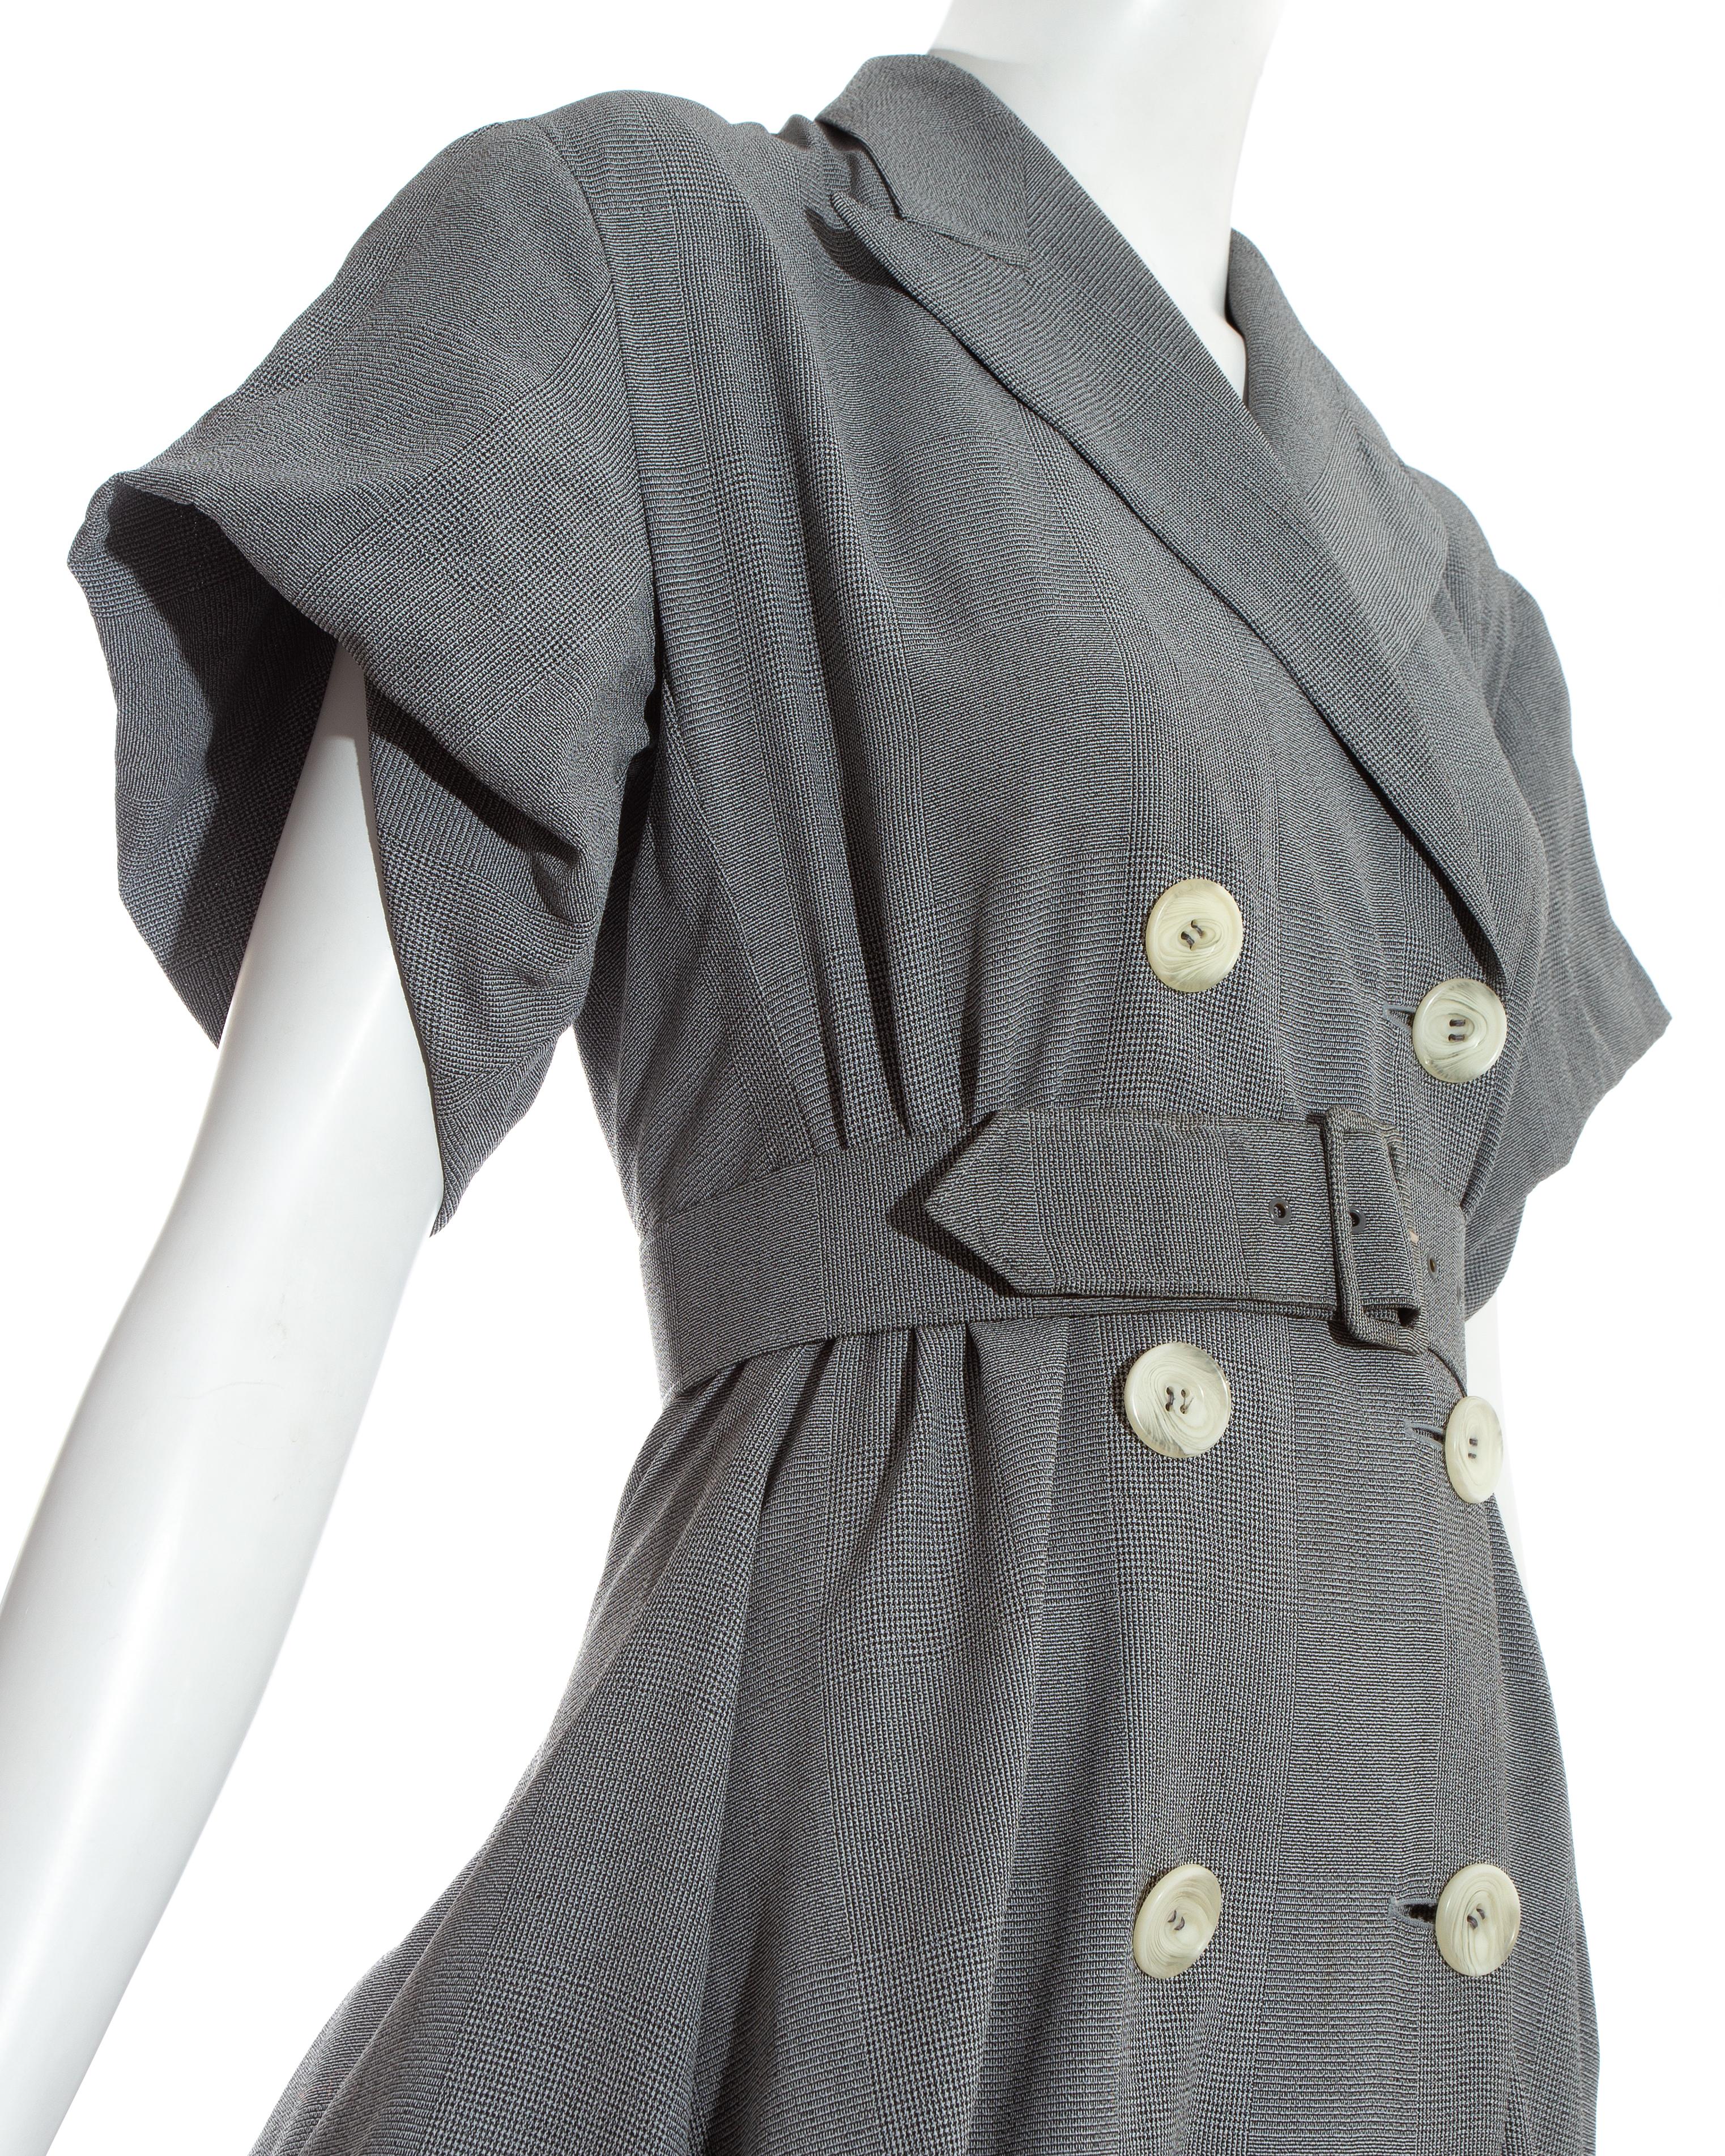 John Galliano grey checked Blanche Dubois bustled coat dress, ss 1988 In Good Condition For Sale In London, GB